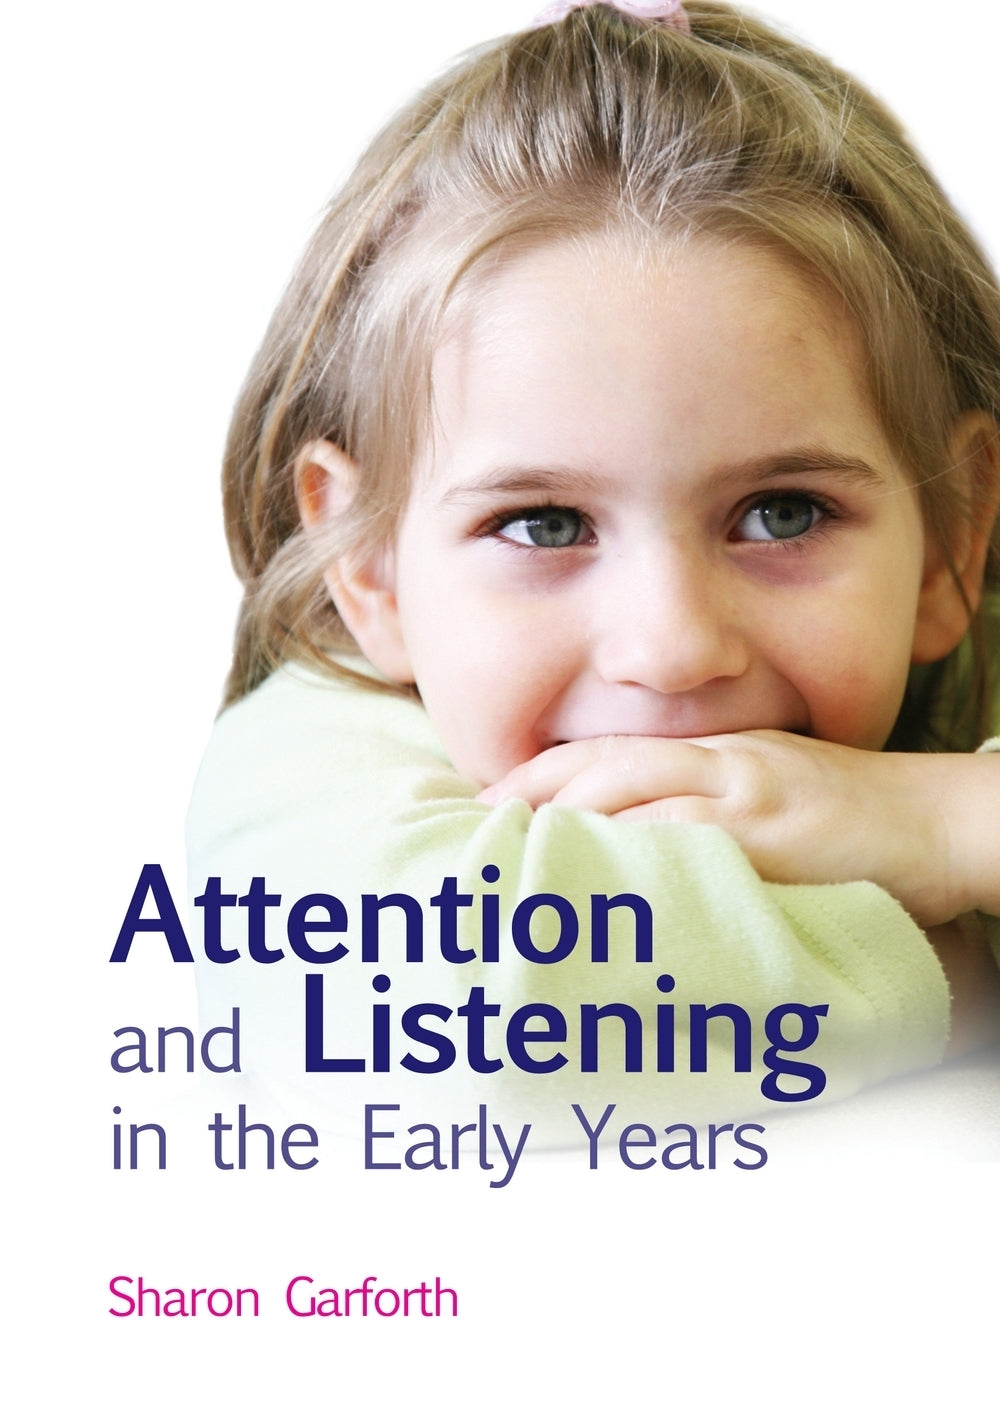 Attention and Listening in the Early Years by Sharon Garforth